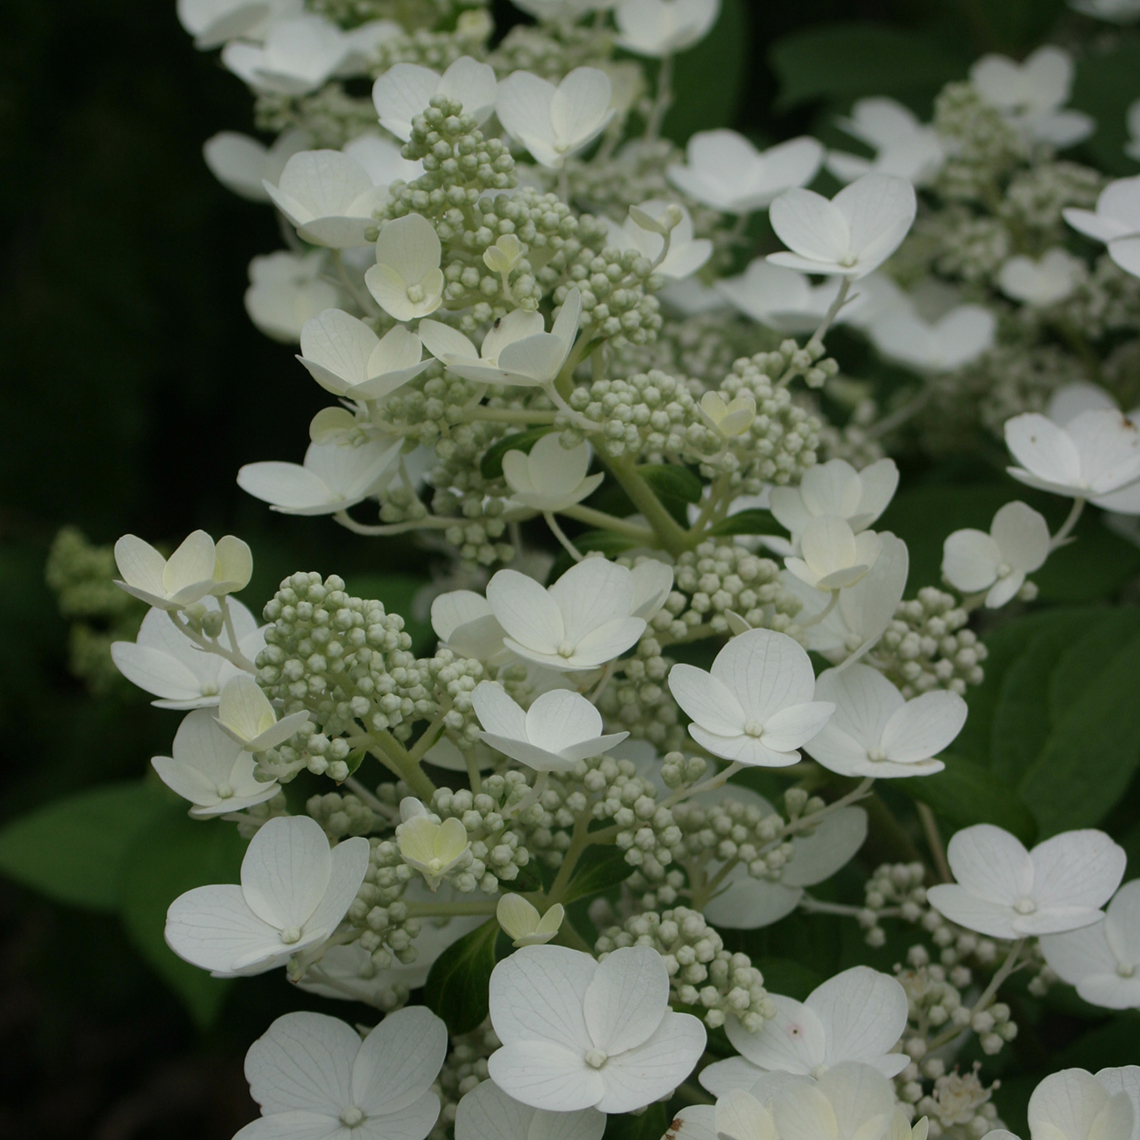 Closeup of the beautiful white lacecap flowers of Quick Fire hydrangea